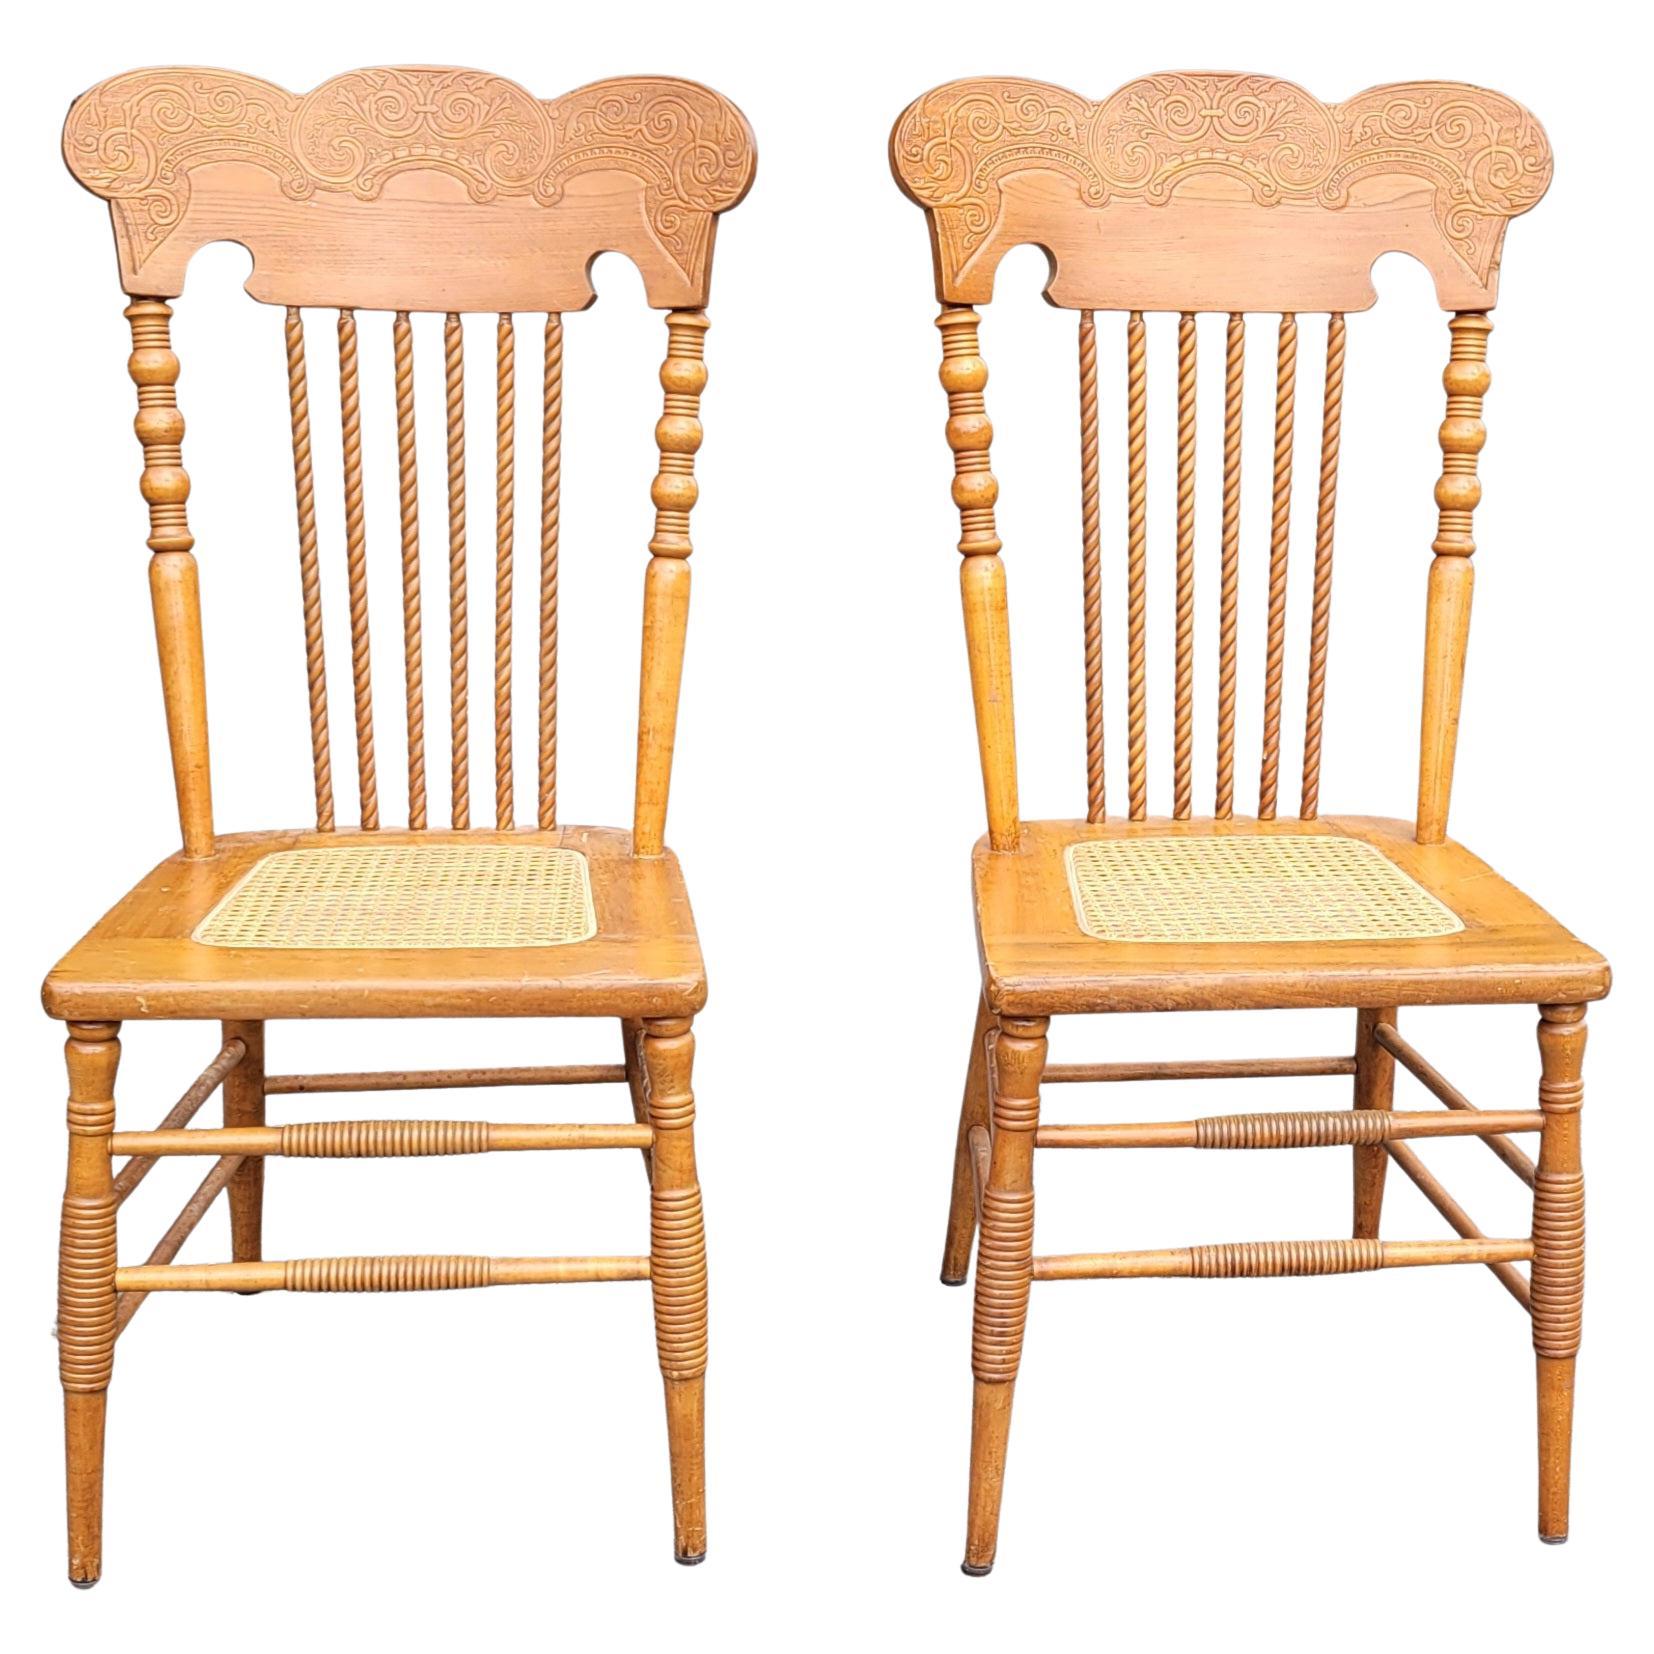 Refinished Pair of Victorian Style Press Back Spiral Maple Chairs with Cane Seat